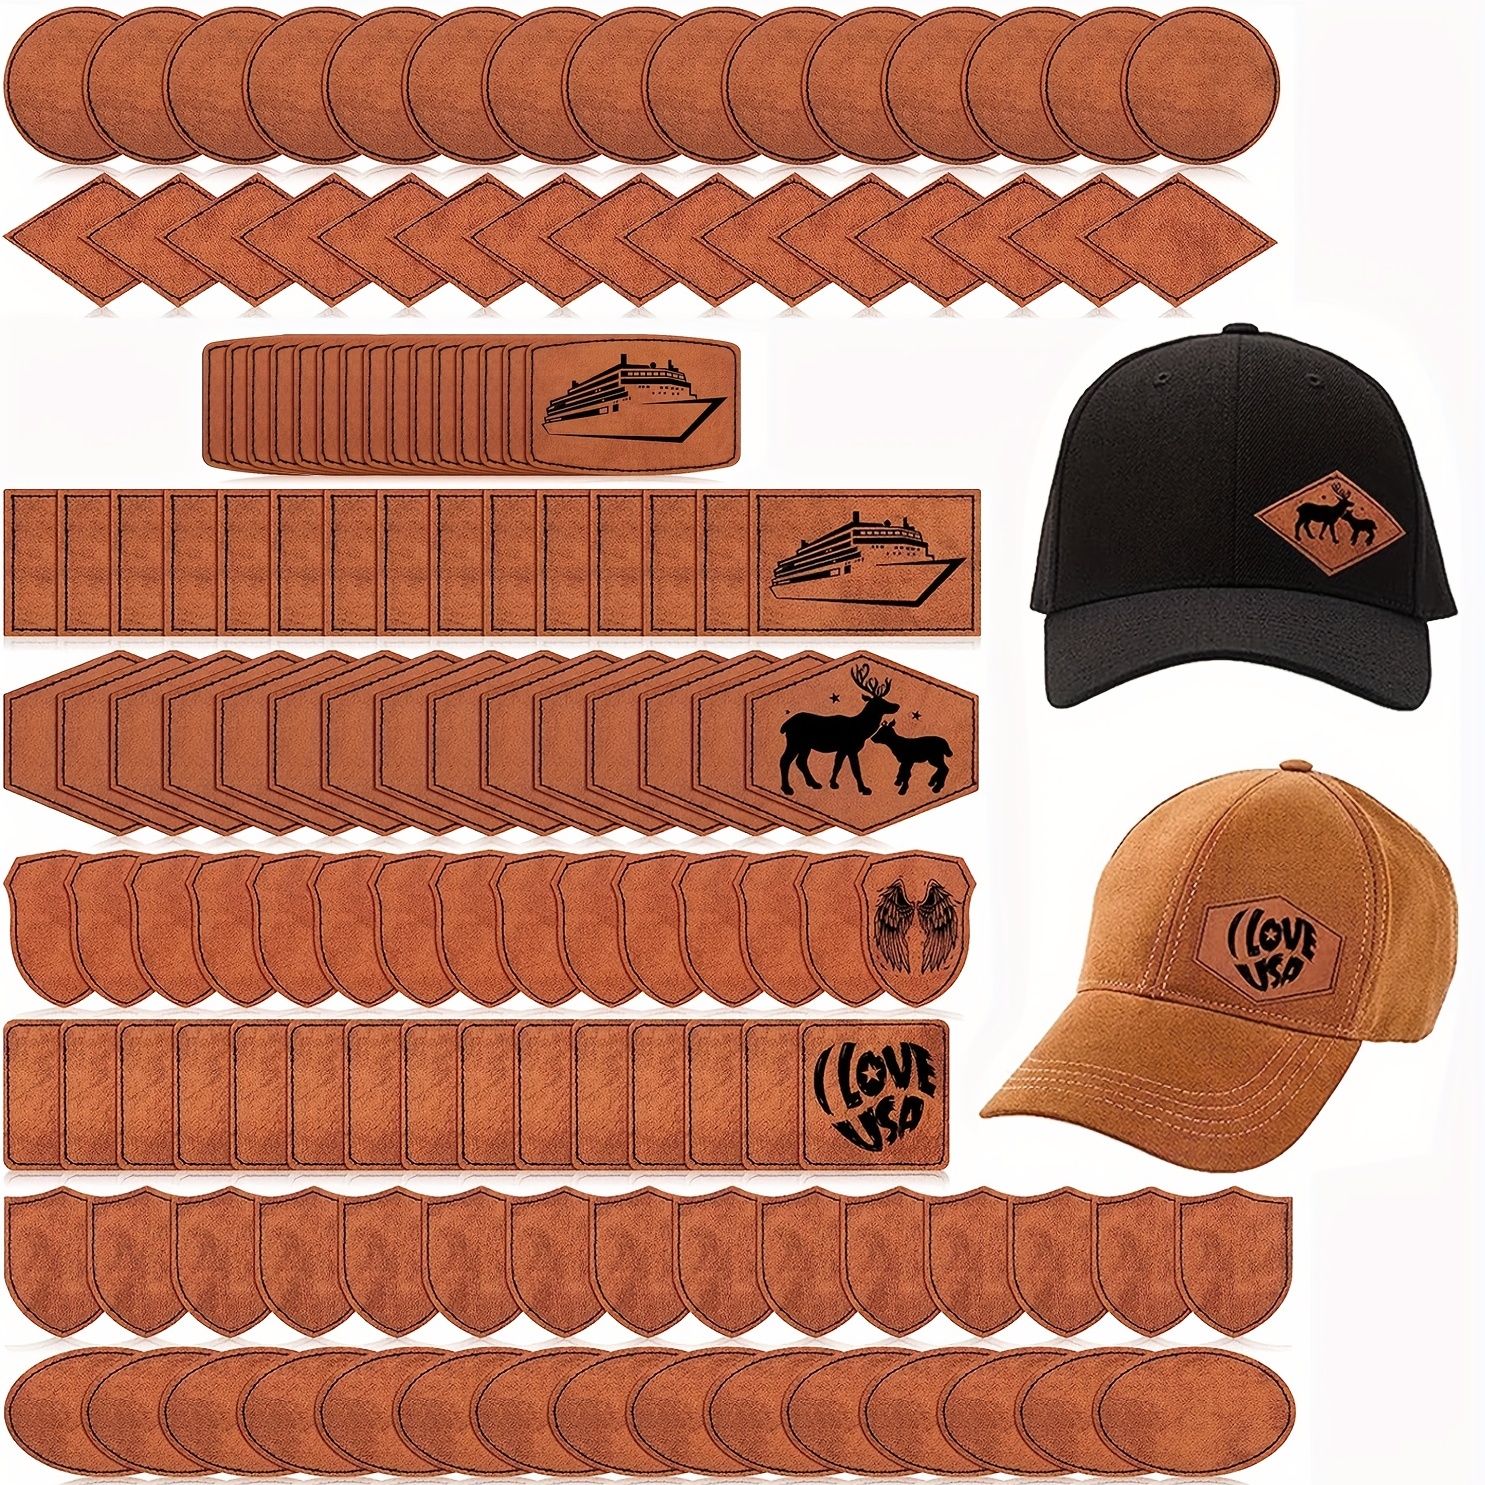  30PC Pieces Blank Rustic Leatherette Hat Patches with